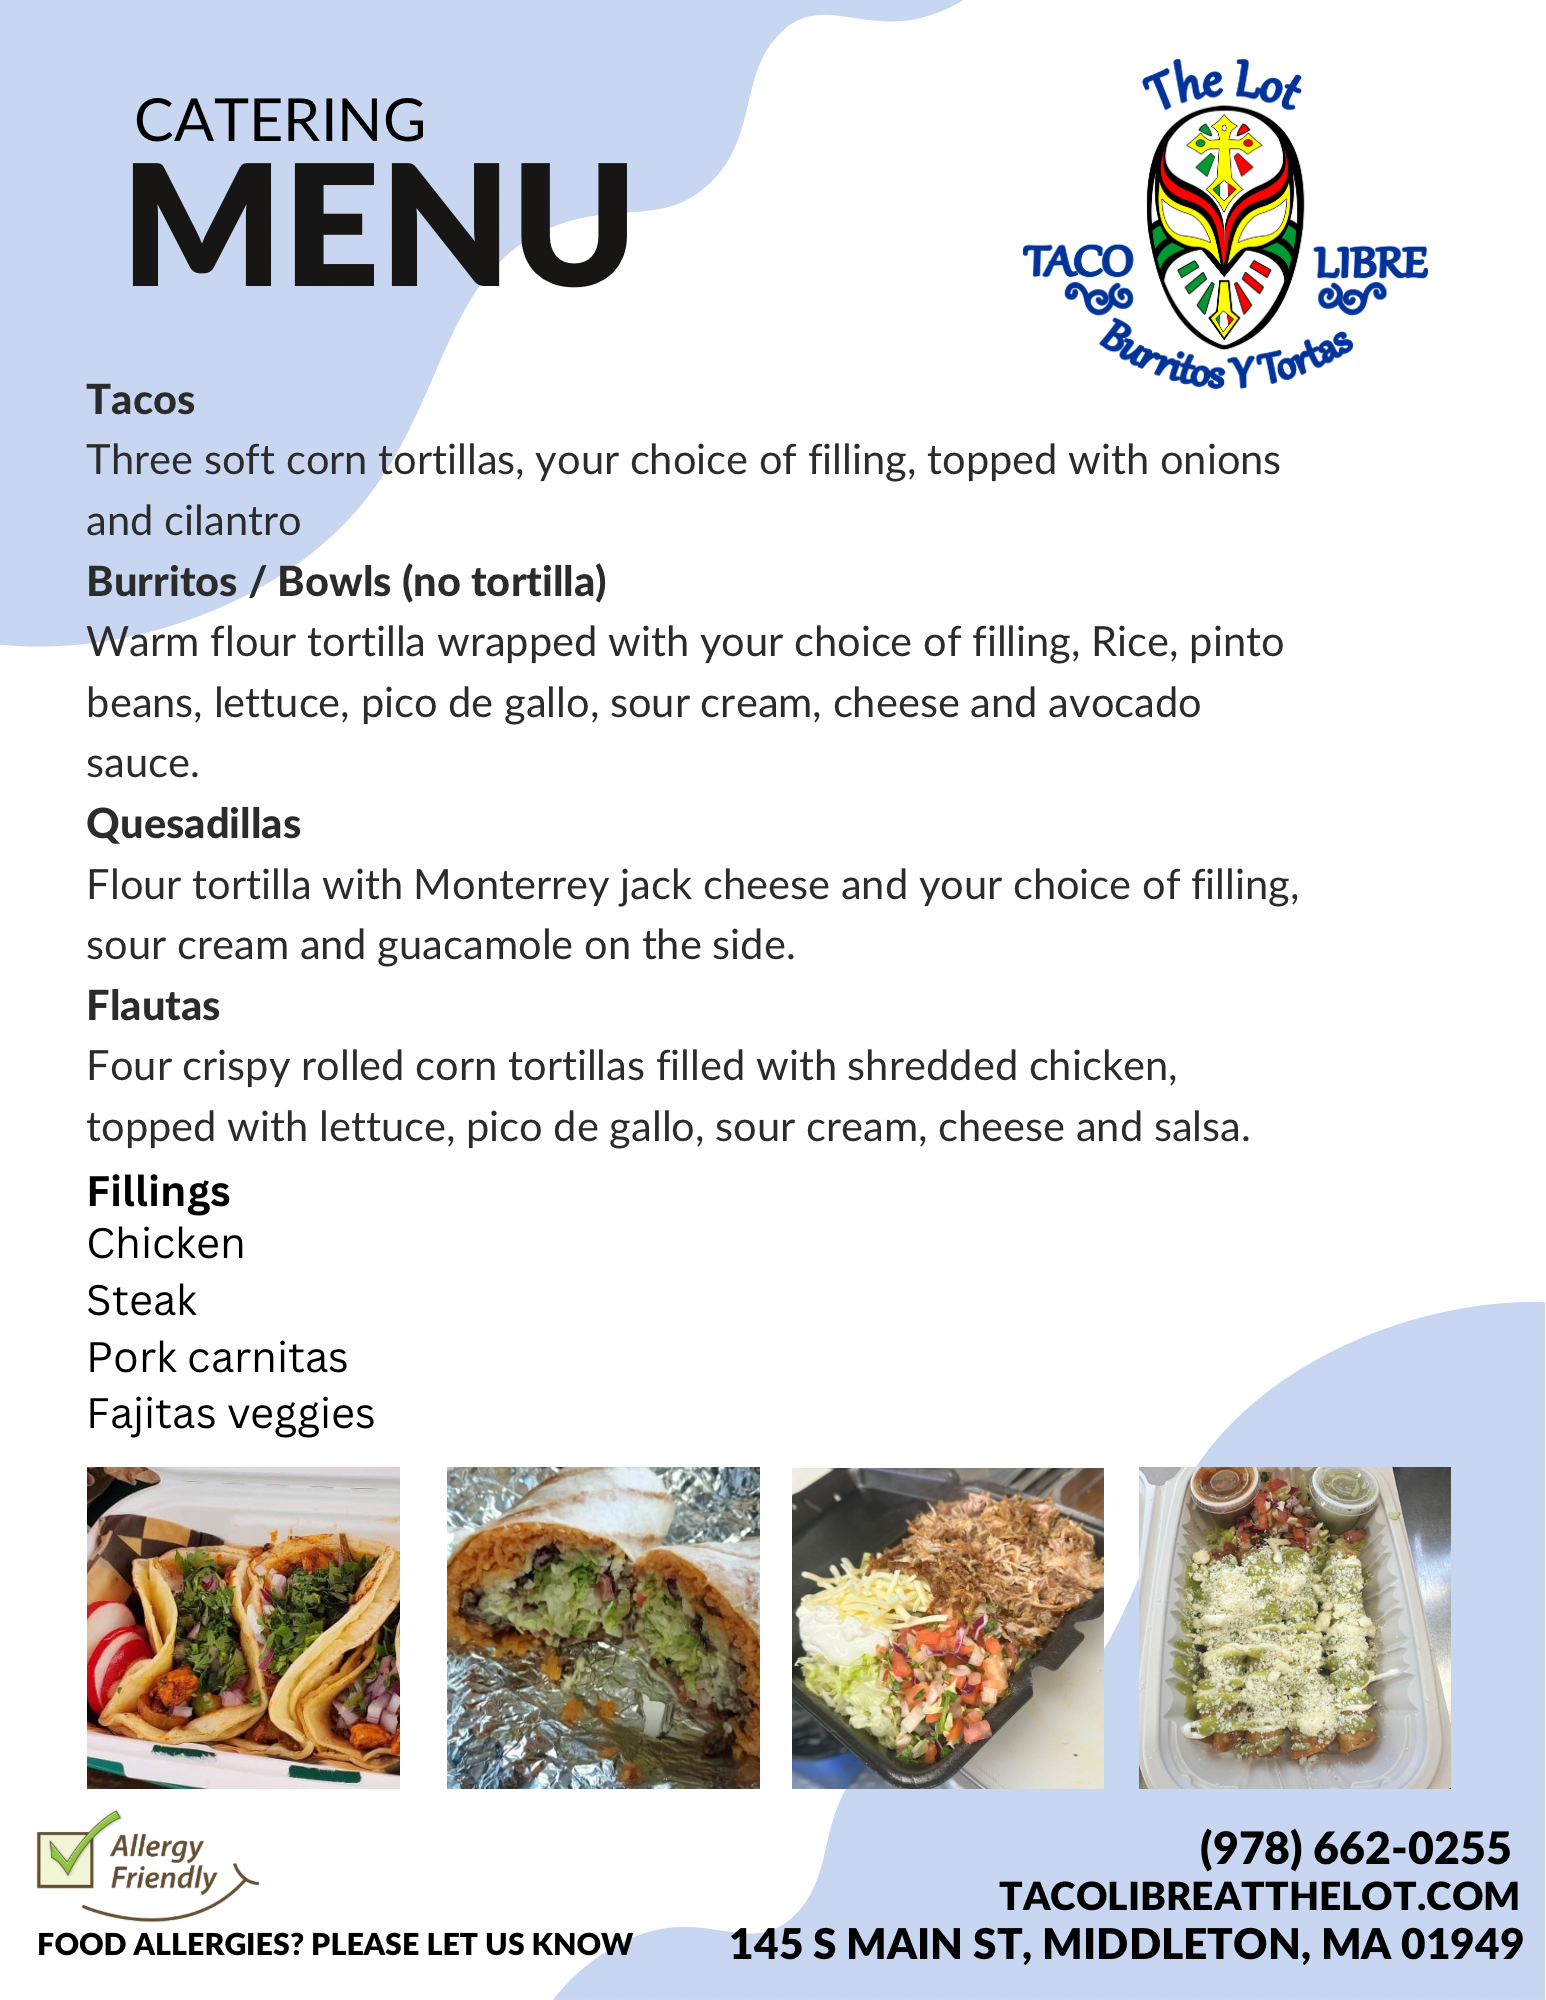 A catering menu flyer for "the taco libre," featuring an assortment of mexican dishes including tacos, burritos, and bowls with options for fillings like grilled chicken and pork carnitas, accompanied by images.